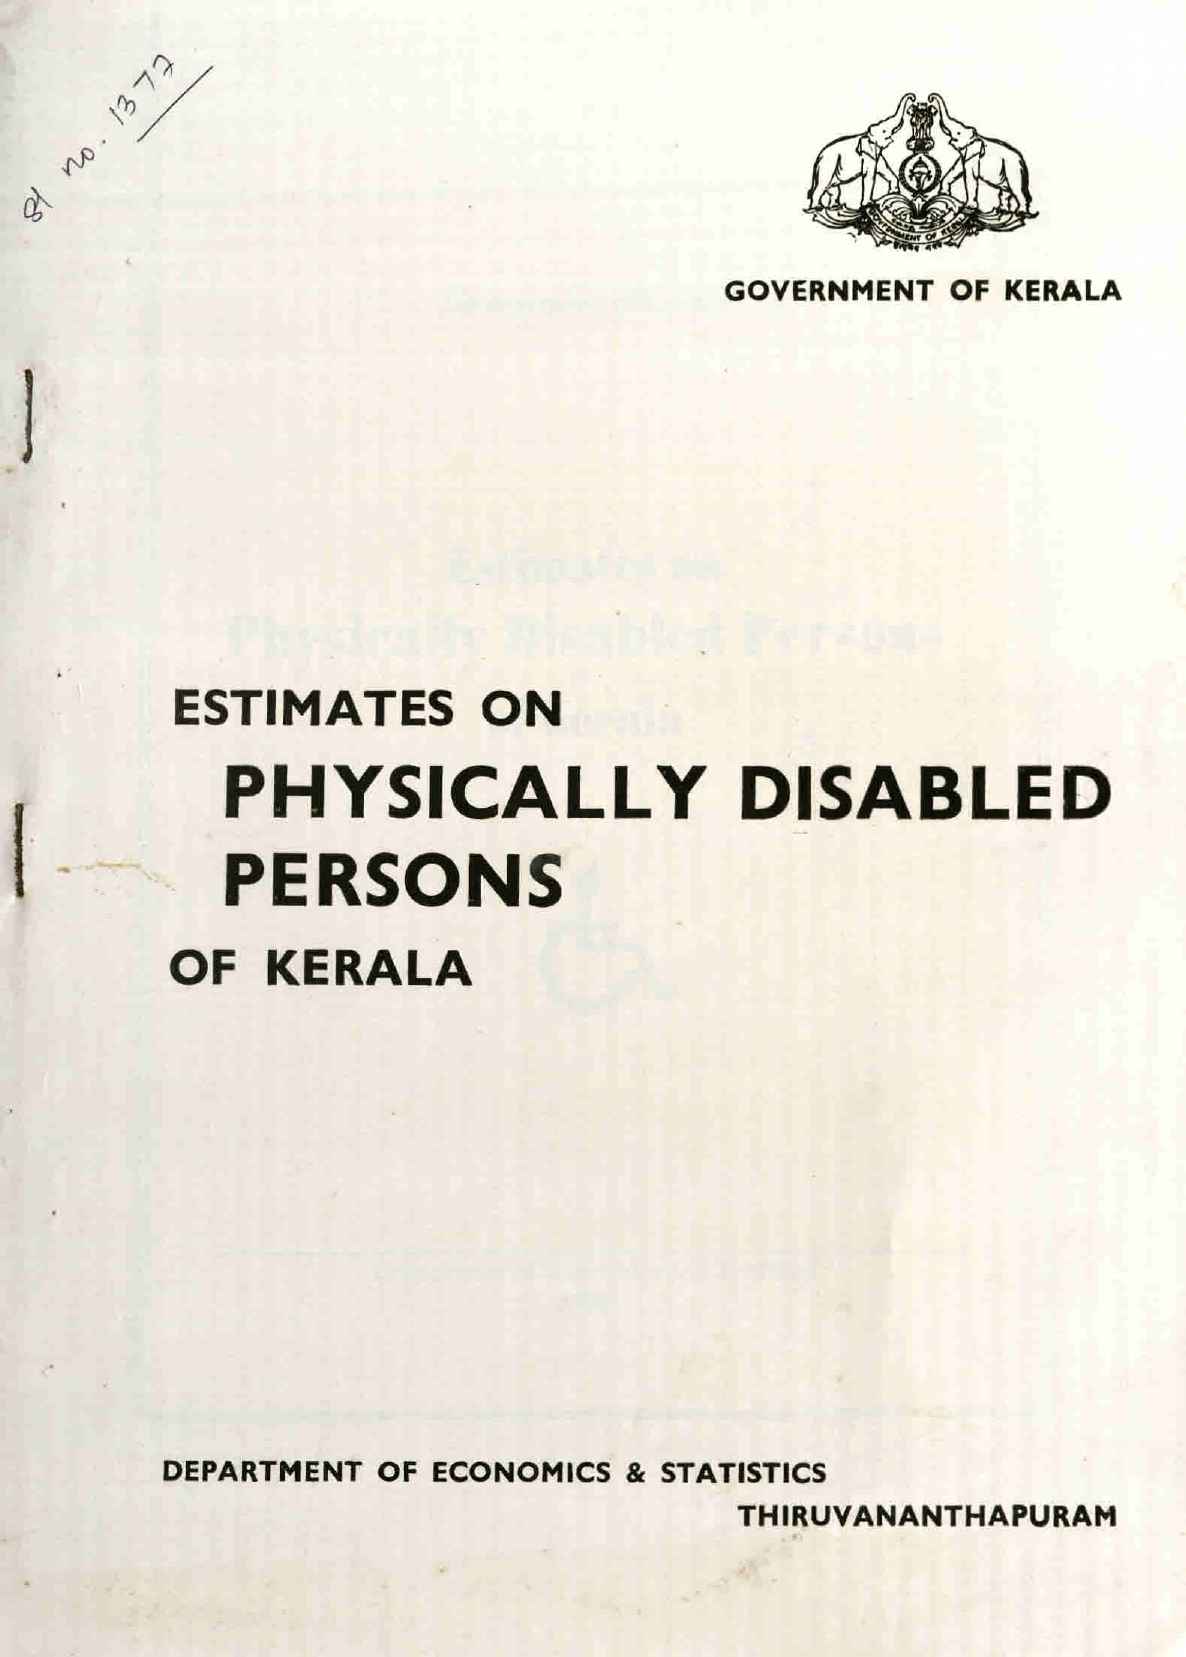 ESTIMATES ON PHYSICALLY DISABLED PERSONS OF KERALA